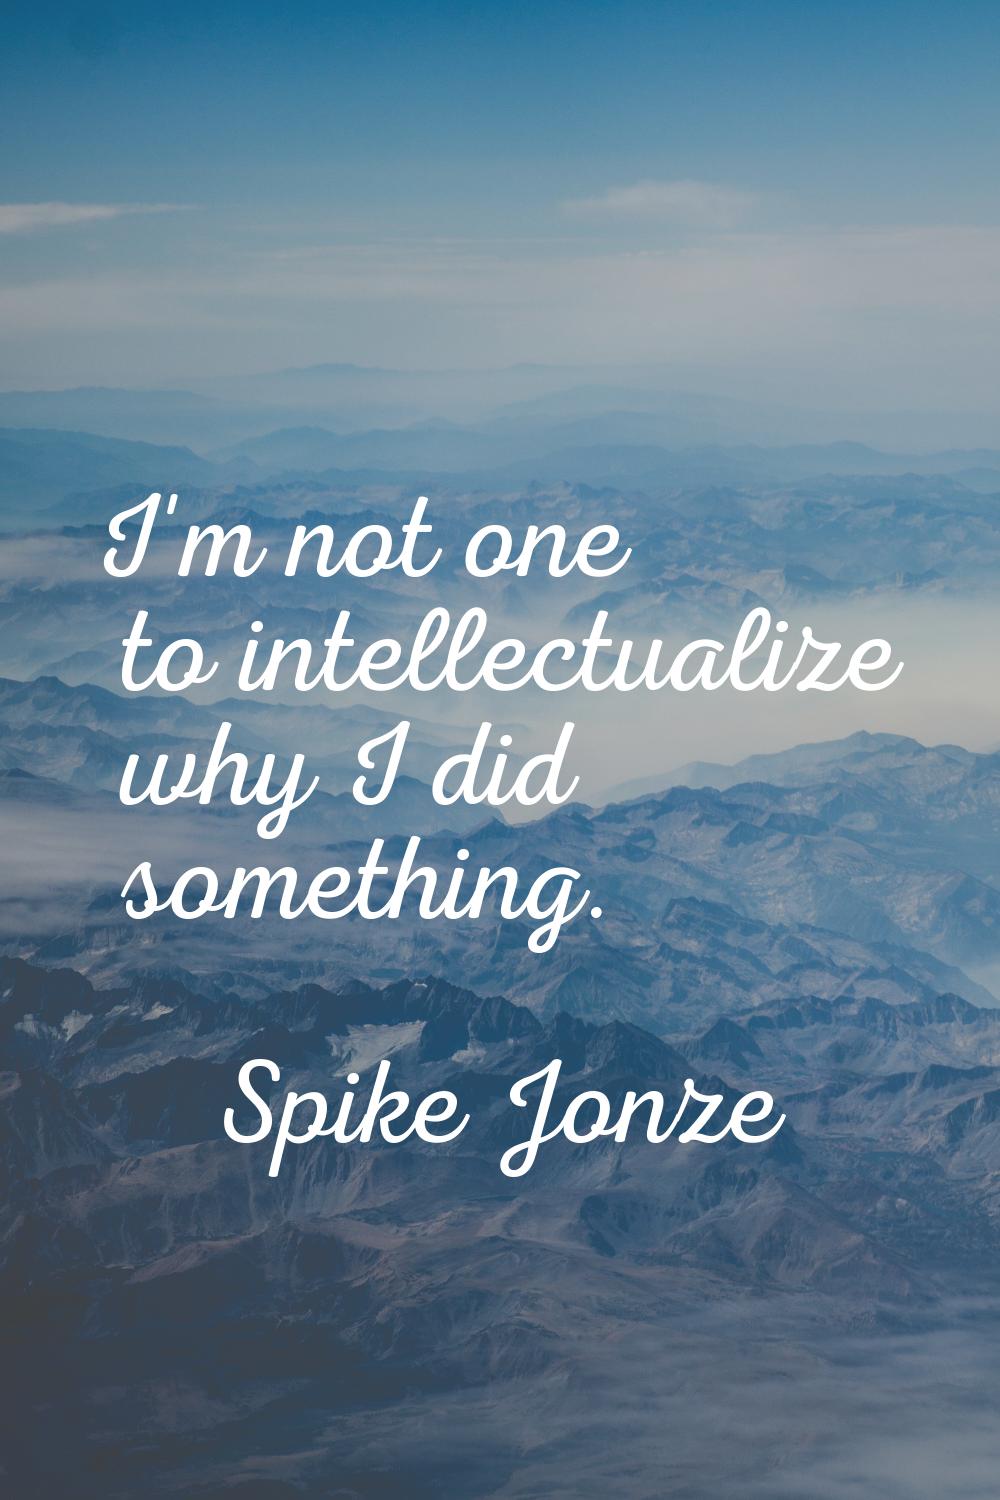 I'm not one to intellectualize why I did something.